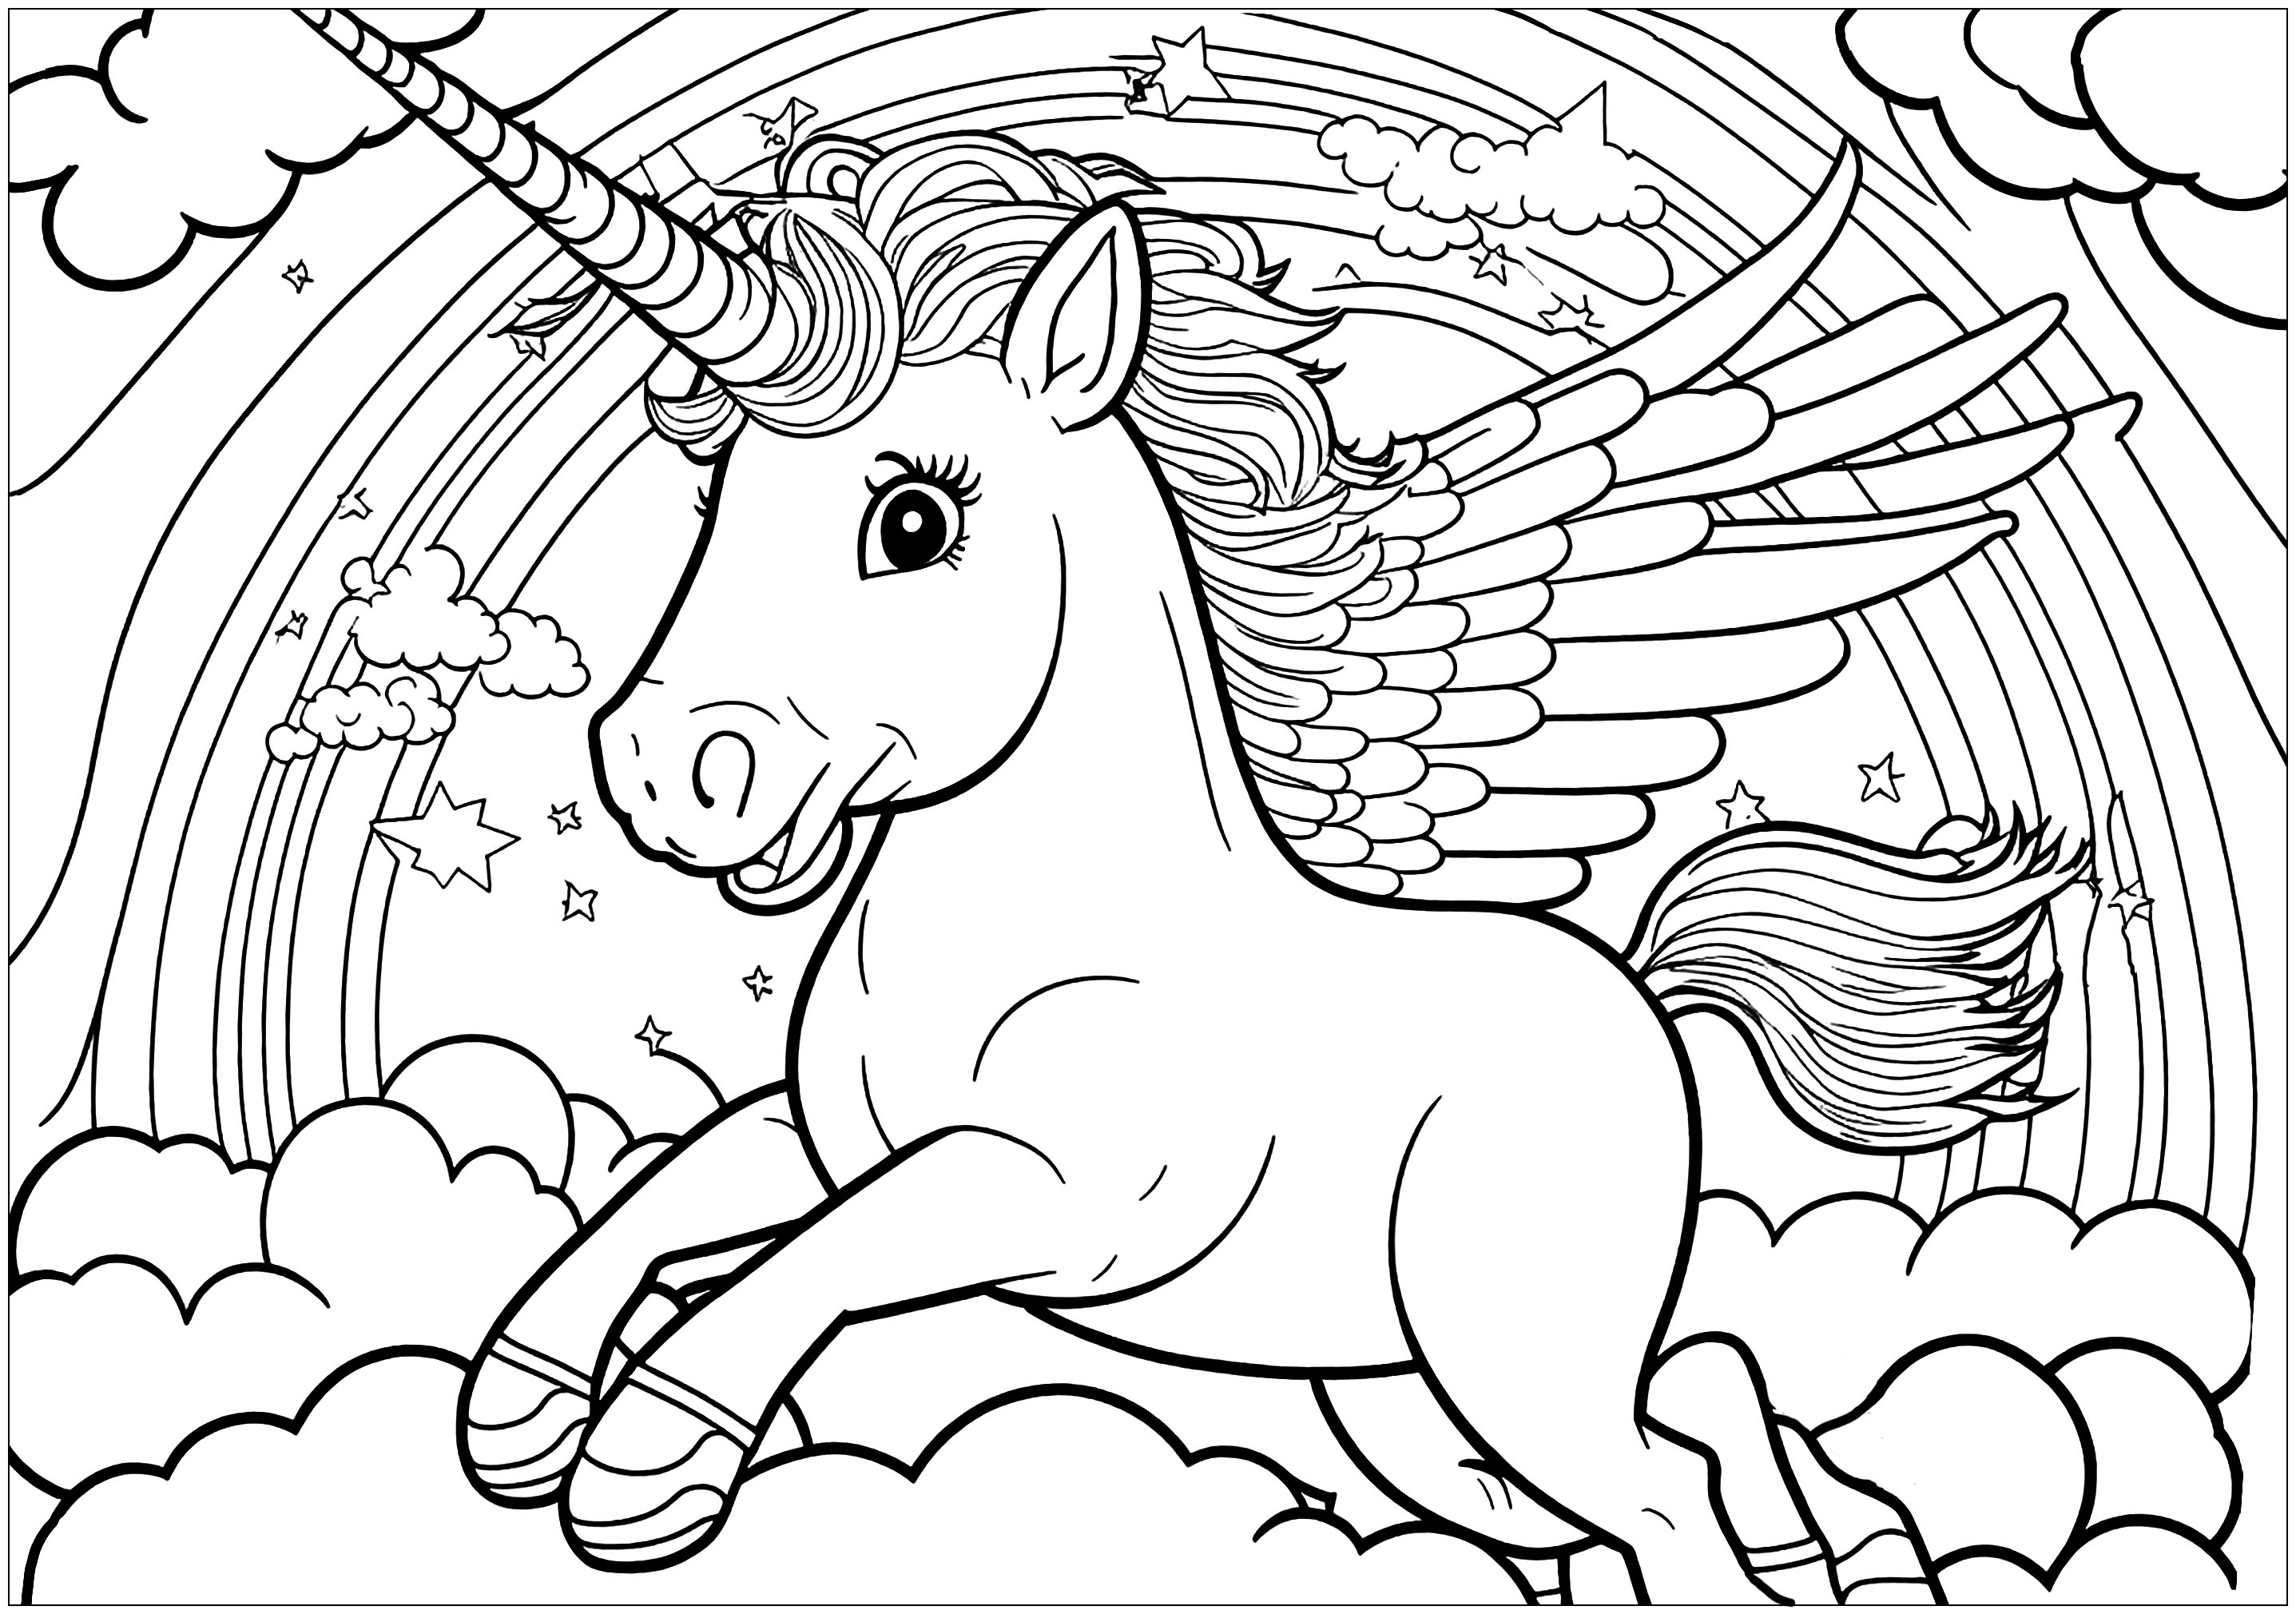 Rainbow Coloring Pages - Free Printable